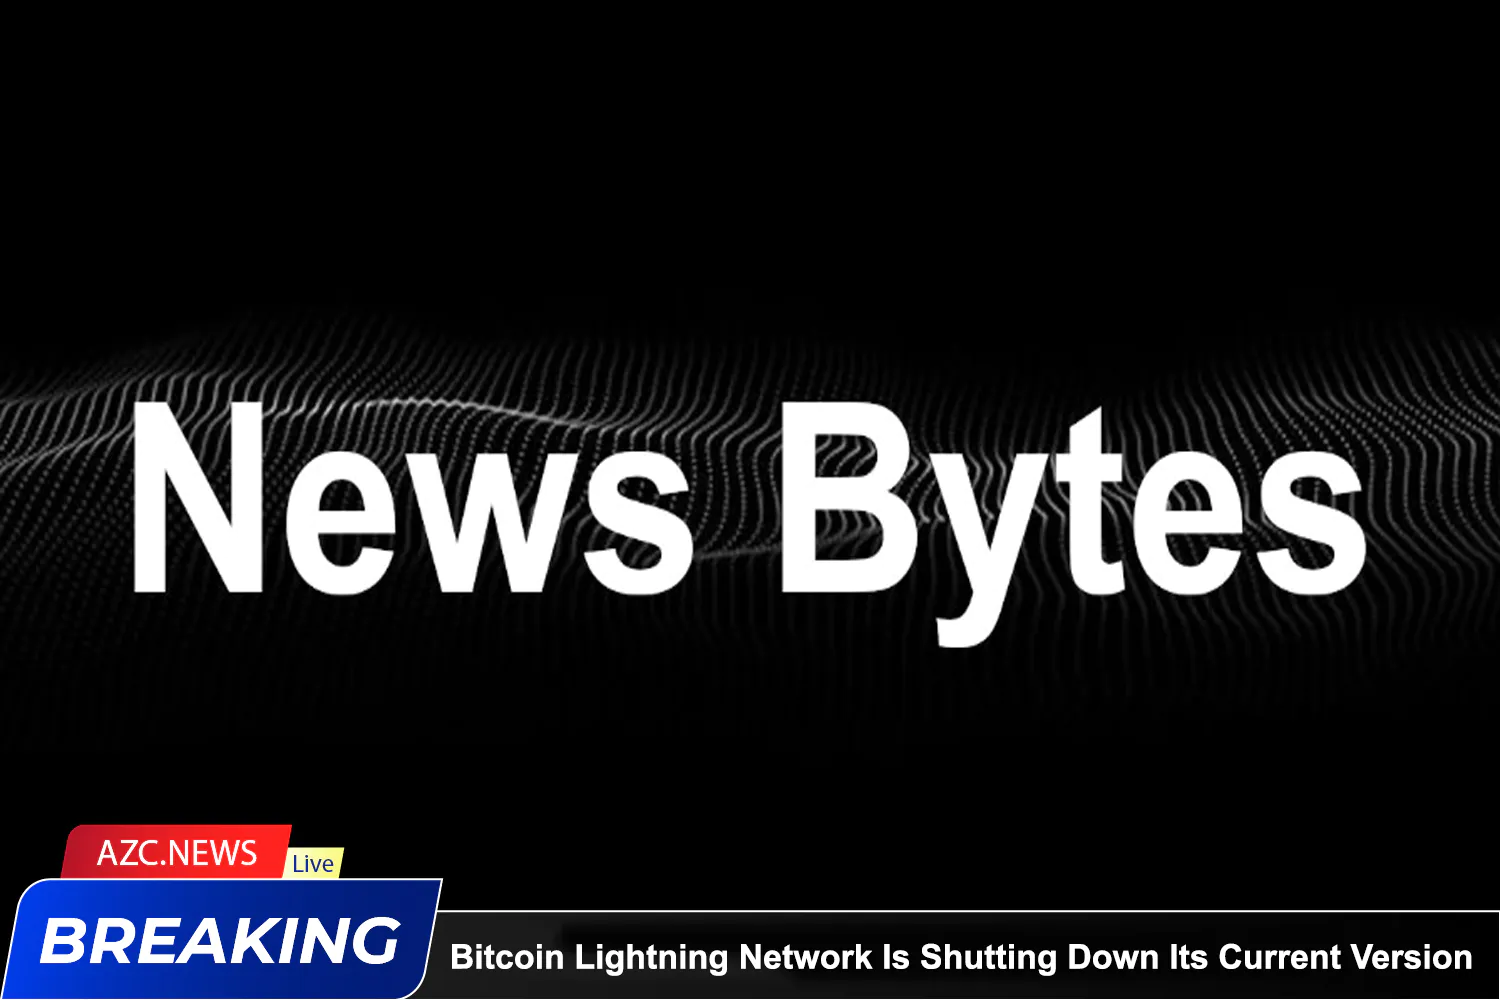 Azcnews Bitcoin Lightning Network Is Shutting Down Its Current Version